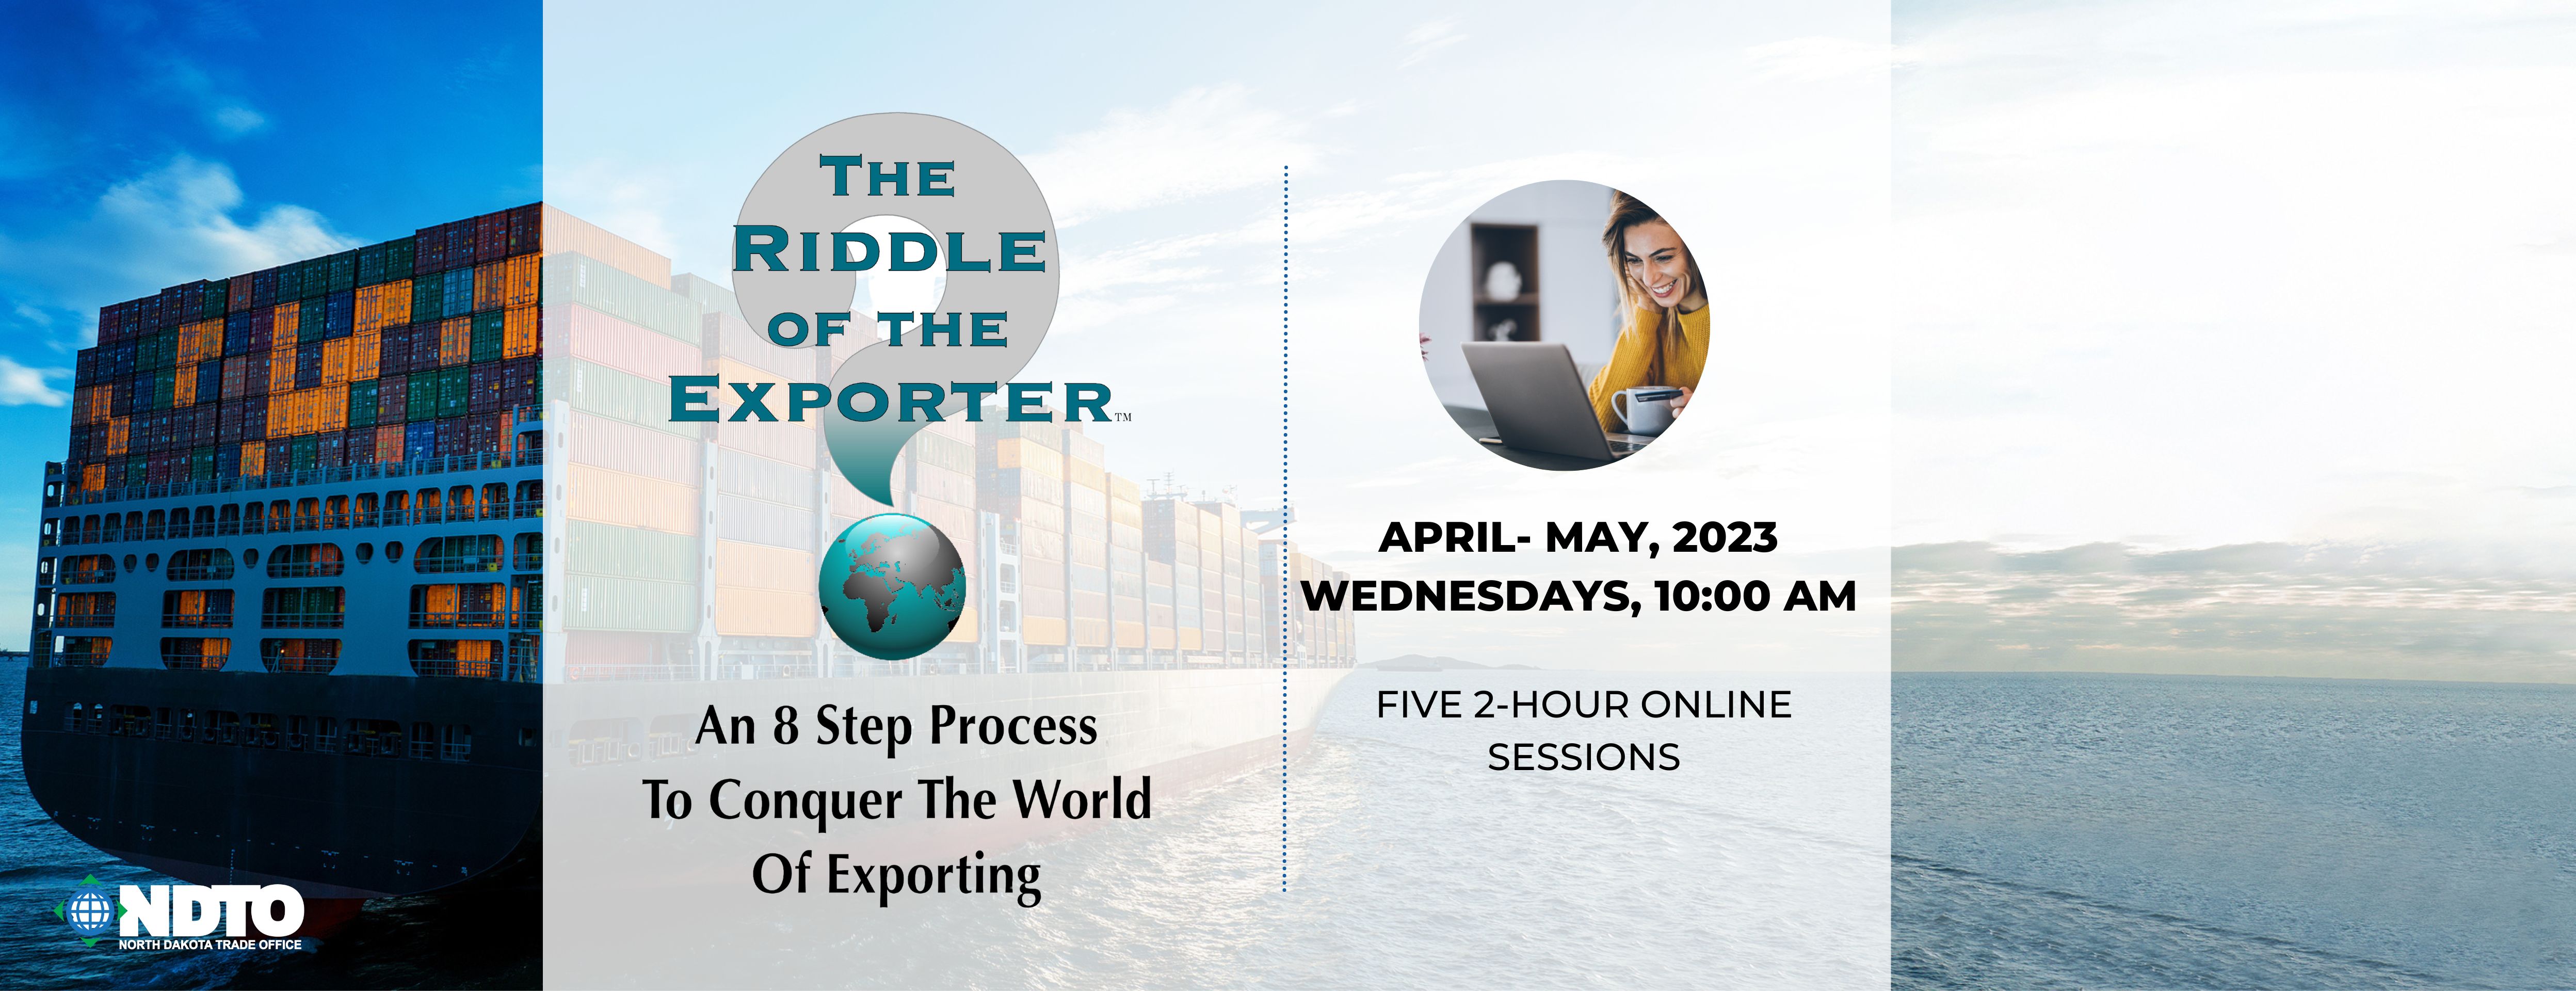 The Riddle of the Exporter- Live Online